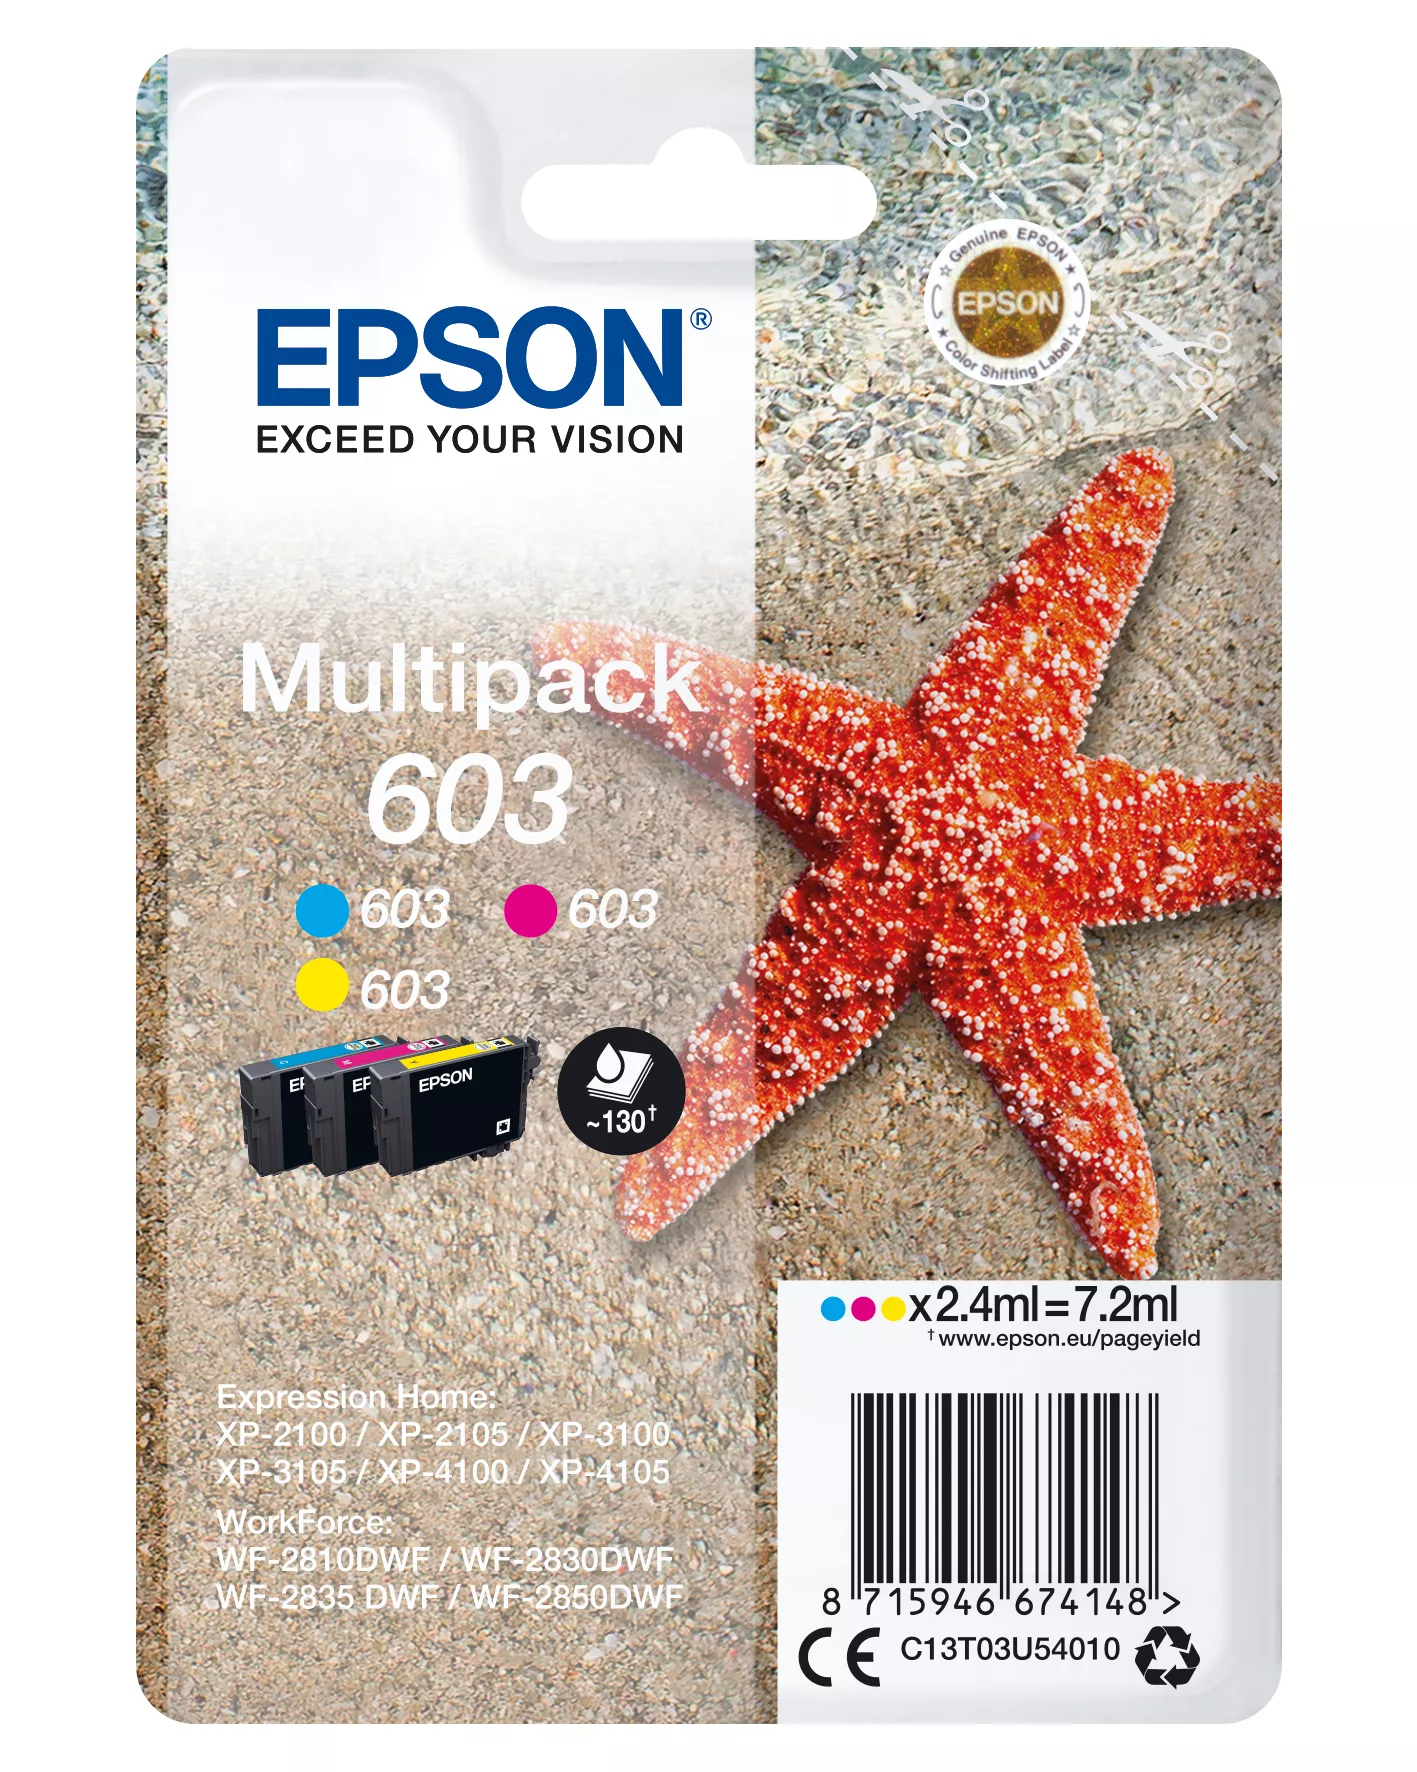 Achat EPSON Multipack 3-colours 603 Ink - 8715946674148